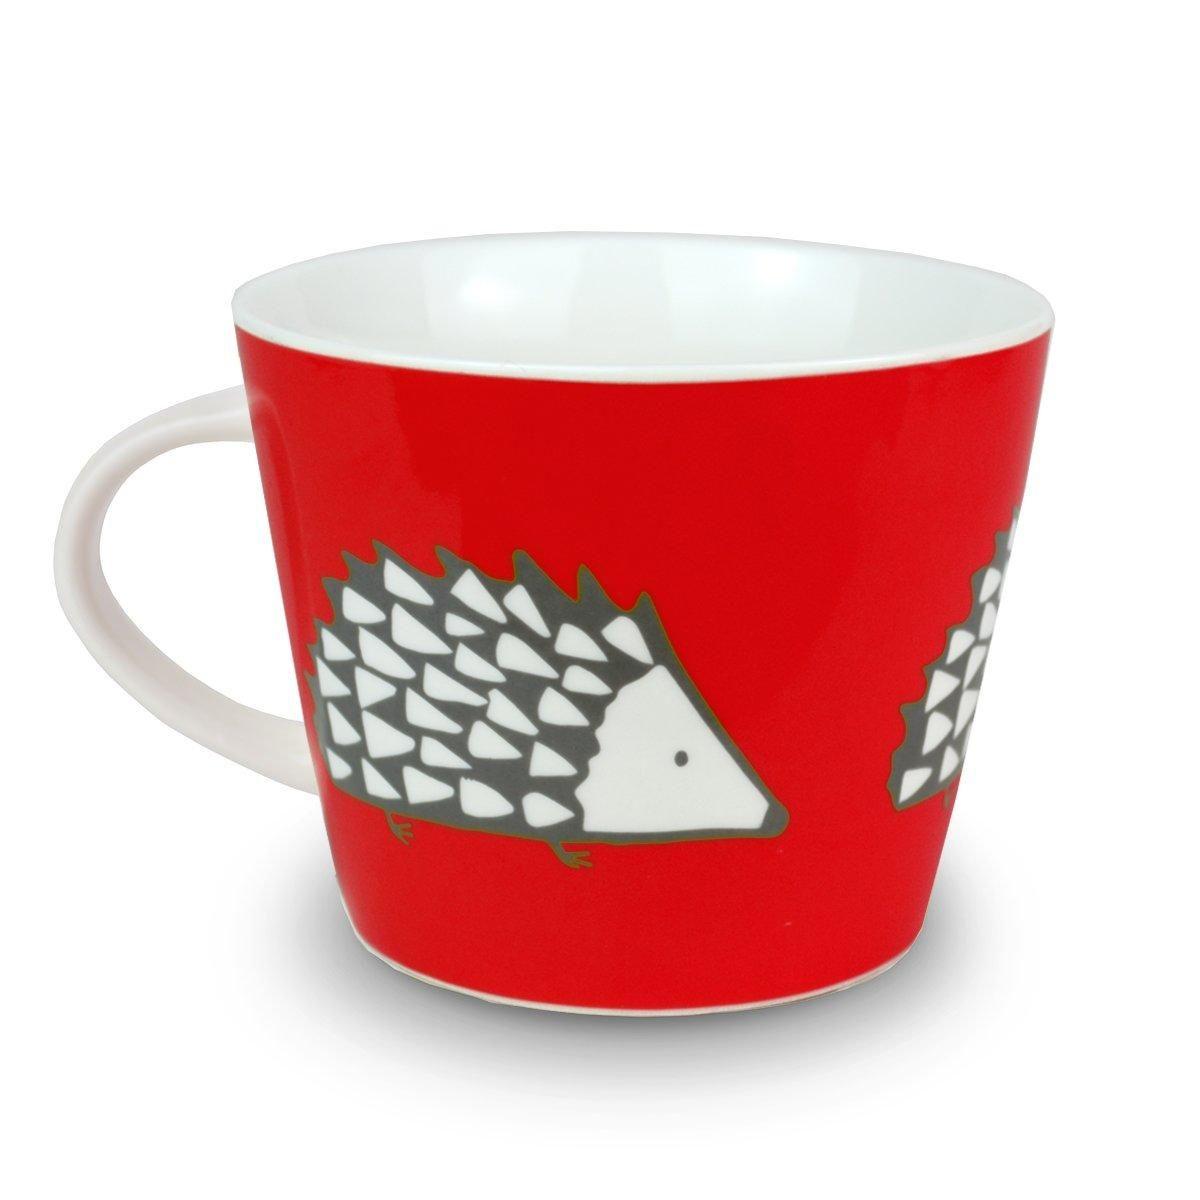  Mugs And Cups SC-0070 